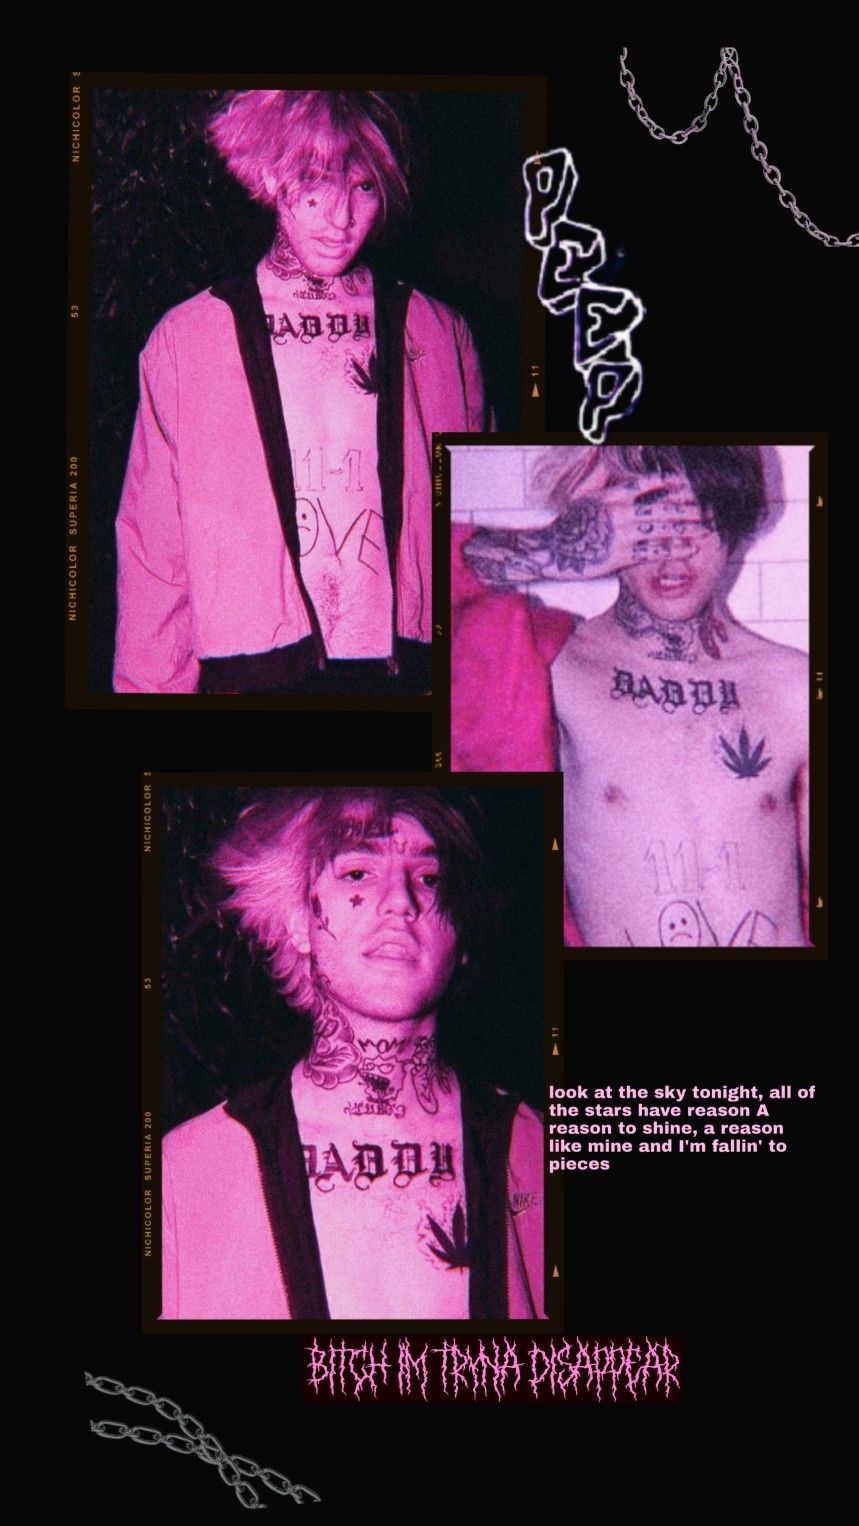 Lil peep wallpaper i made for my phone - Lil Peep